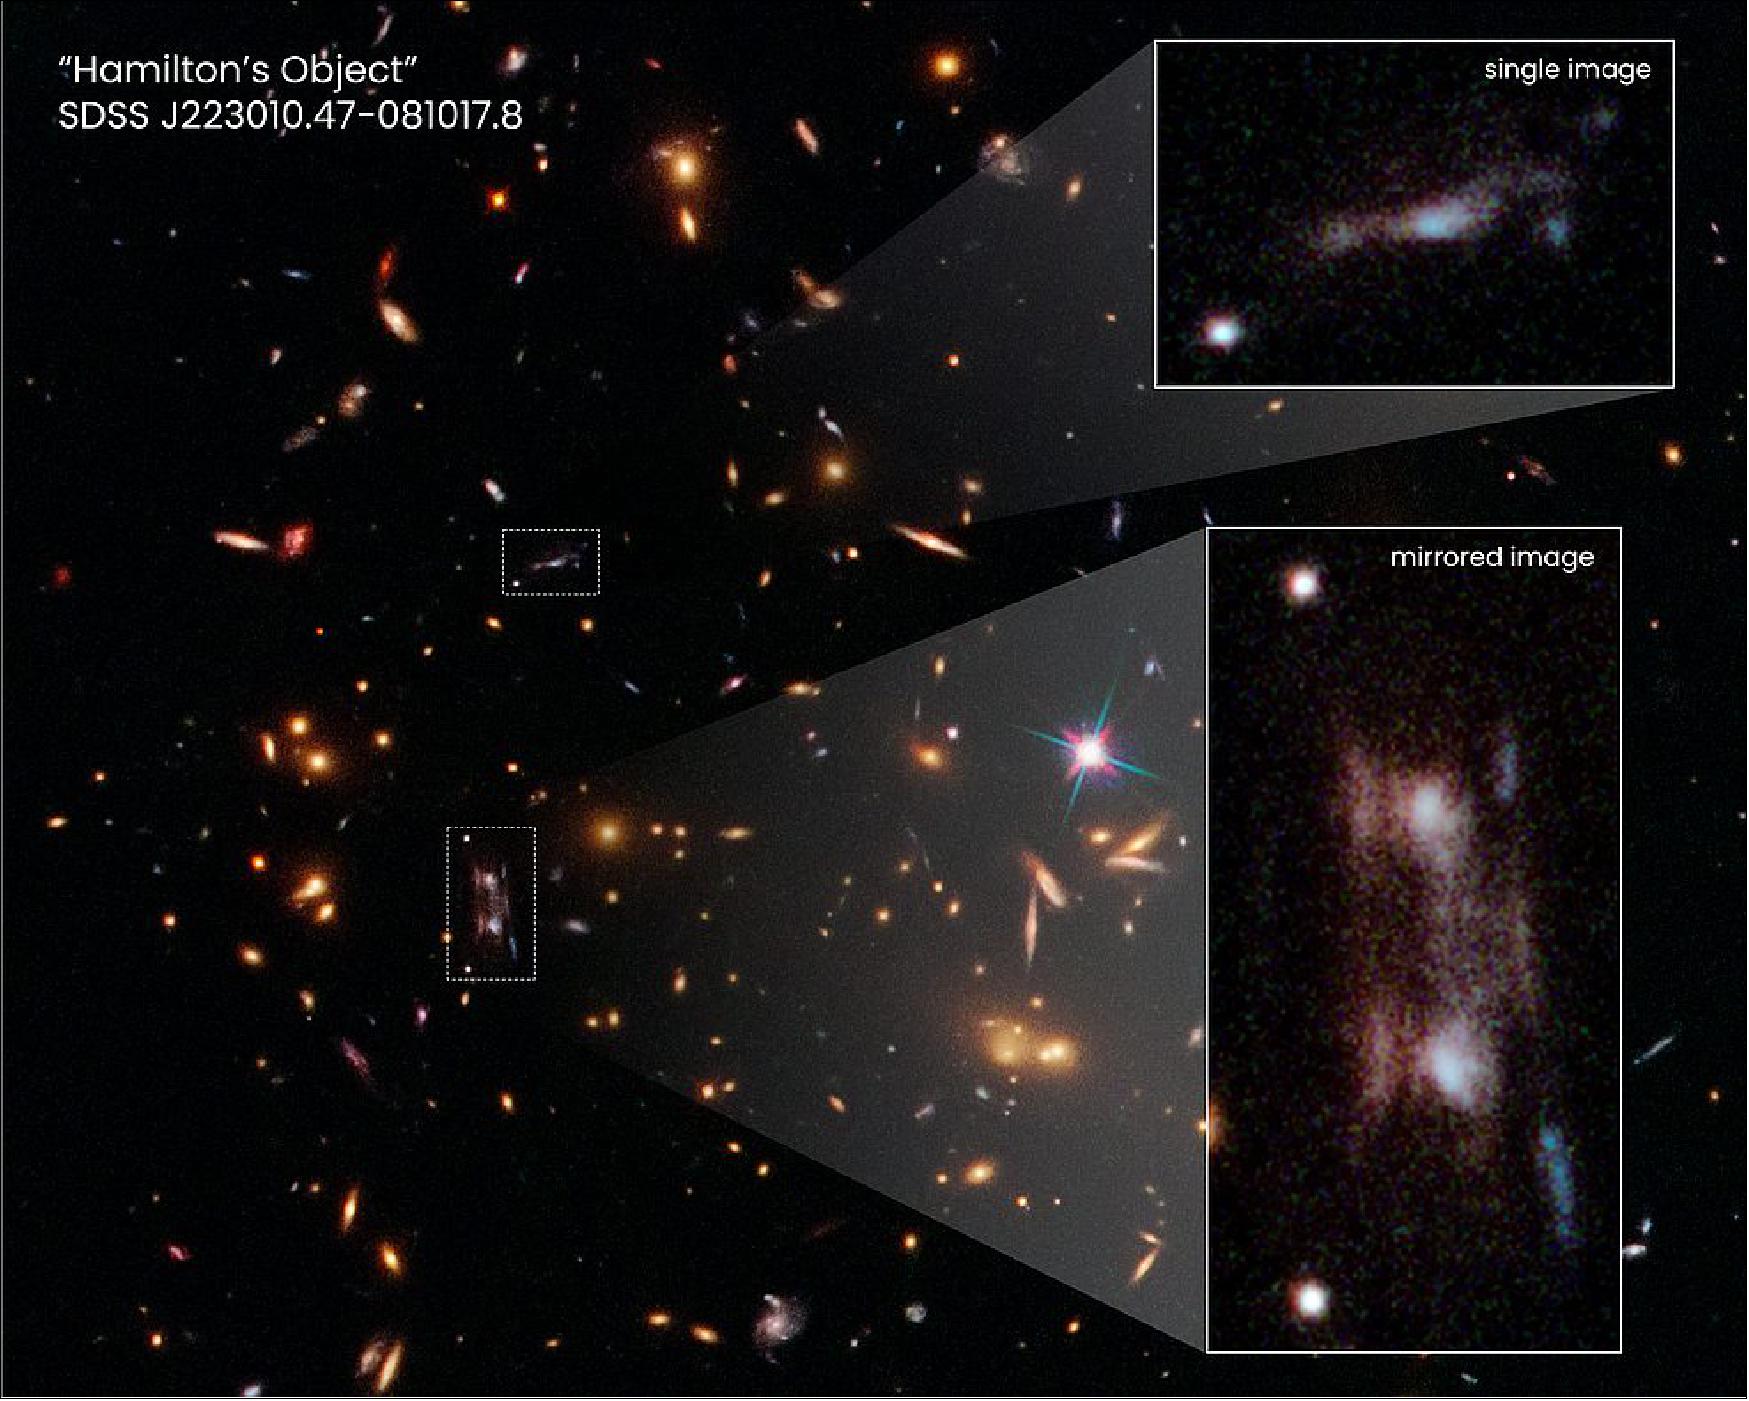 Figure 42: This Hubble Space Telescope snapshot shows three magnified images of a distant galaxy embedded in a cluster of galaxies. These images are produced by a trick of nature called gravitational lensing. The galaxy cluster's immense gravity magnifies and distorts the light from the distant galaxy behind it, creating the multiple images. The galaxy cluster, catalogued as SDSS J223010.47-081017.8, is 7 billion light-years from Earth. Hubble has observed many gravitationally lensed galaxies. However, the images spotted in this Hubble snapshot are unique. Two of the magnified images, shown in the pull-out at bottom right, are exact copies of each other. The two bright ovals are the cores of the galaxy. This rare phenomenon occurs because the background galaxy straddles a ripple in the fabric of space. This “ripple” is an area of greatest magnification, caused by the gravity of dense amounts of dark matter, the unseen glue that makes up most of the universe's mass. As light from the faraway galaxy passes through the cluster along this ripple, two mirror images are produced, along with a third image that can be seen off to the side. A close-up of the third image is shown in the pull-out at top right. This image most closely resembles the remote galaxy, which is located more than 11 billion light-years away. Based on a reconstruction of this image, the researchers determined that the distant galaxy appears to an edge-on, barred spiral with ongoing, clumpy star formation. The mirror images are named “Hamilton’s Object" for the astronomer who discovered them [image credit: Joseph DePasquale (STScI)]